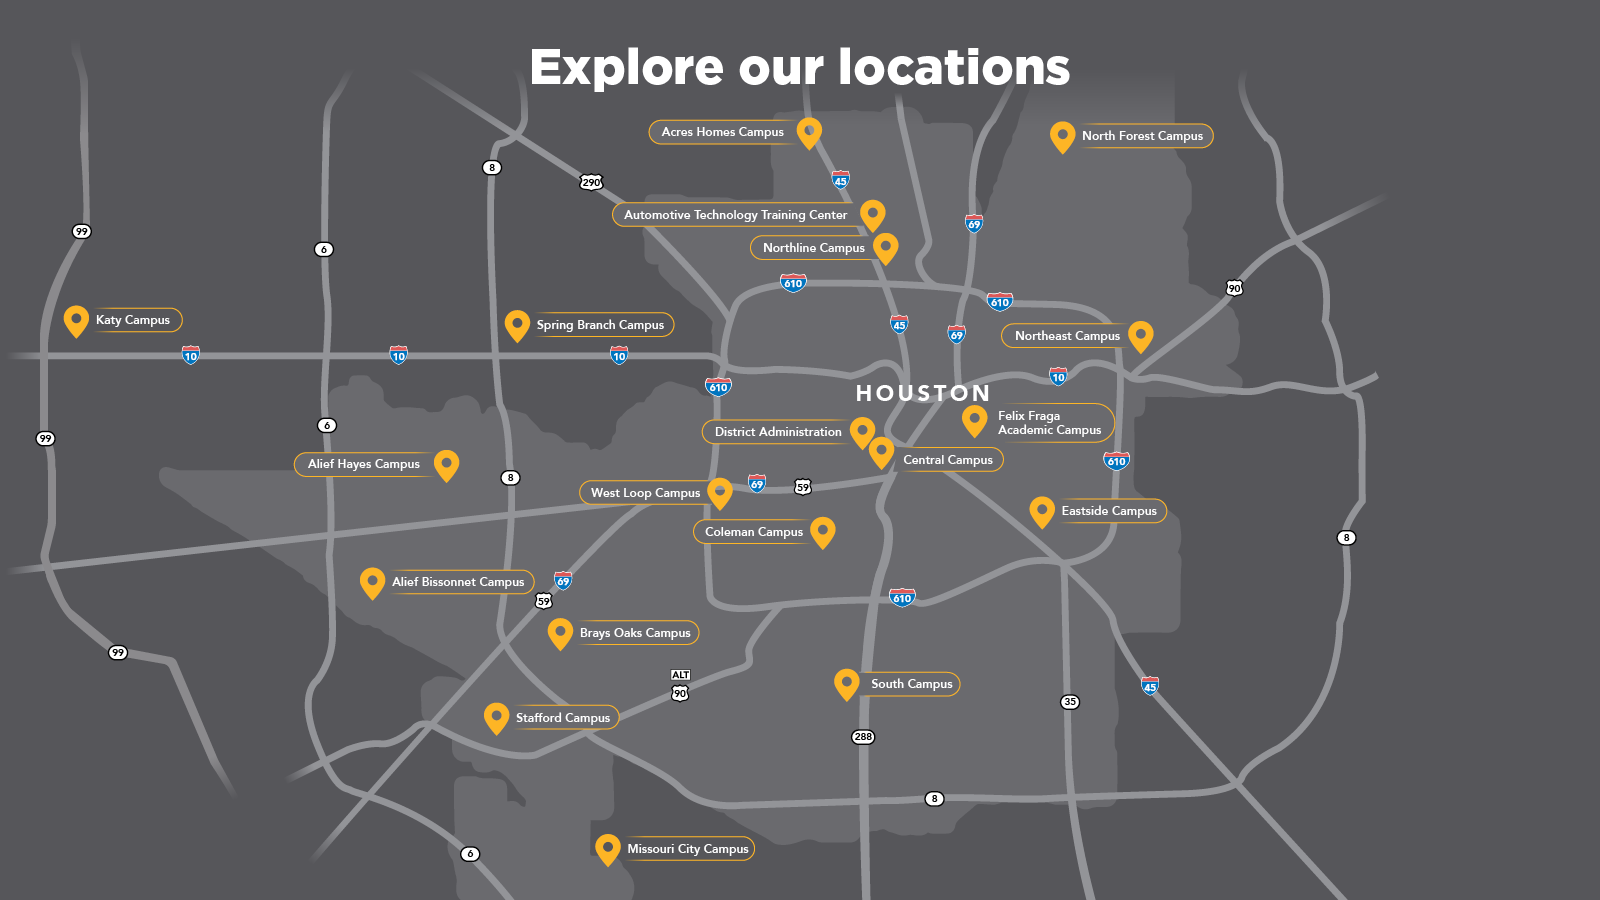 Explore our locations - map